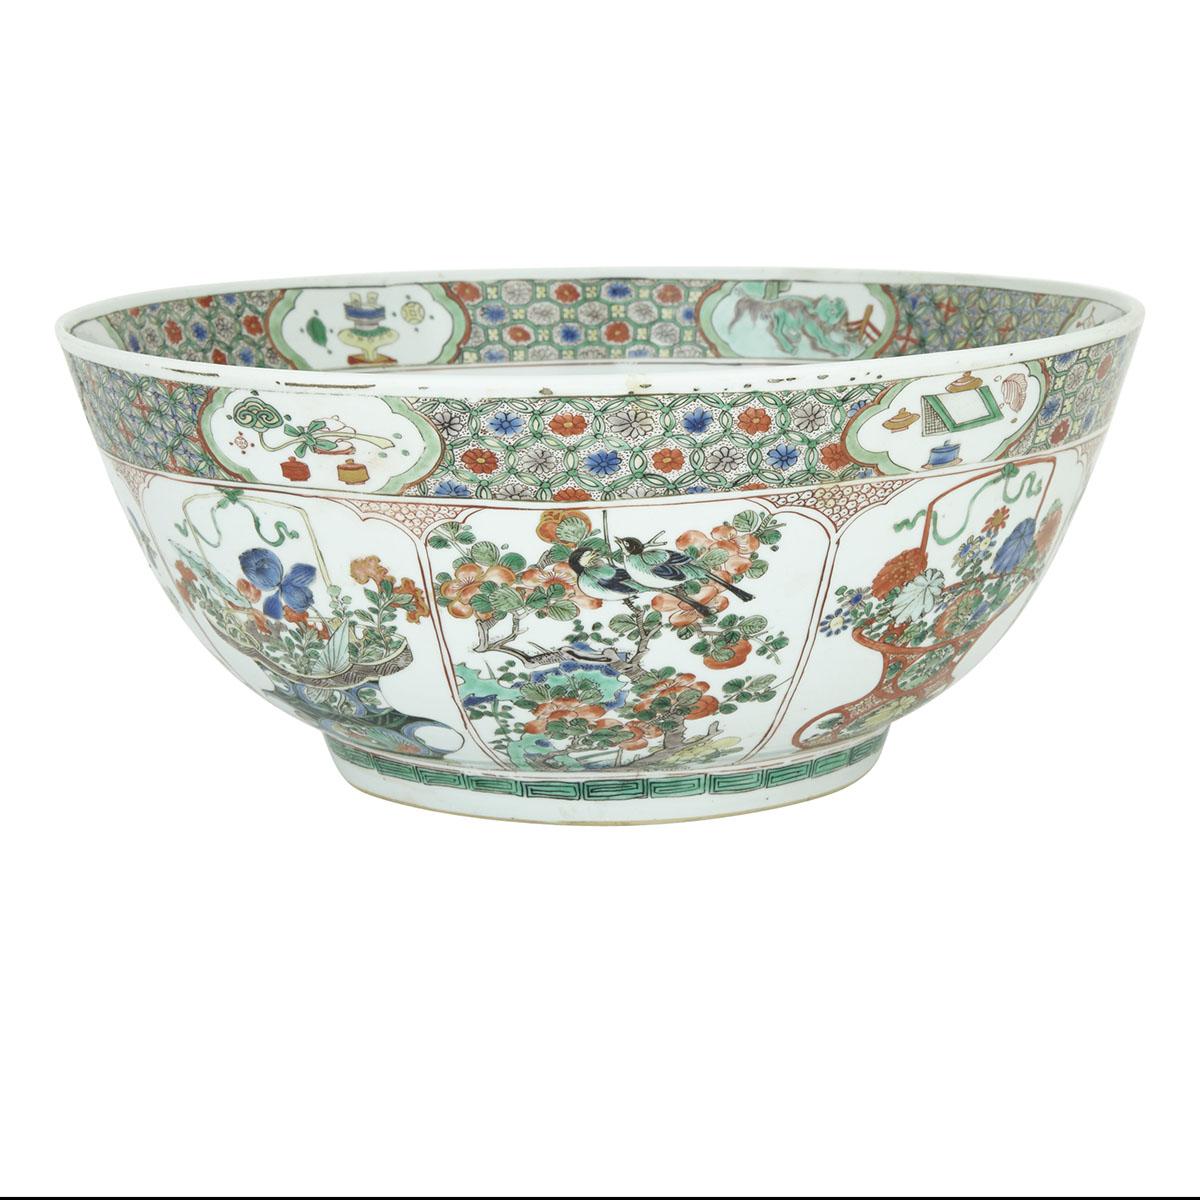 A MASSIVE FAMILLE-VERTE WUCAI PUNCH BOWL, MARK AND PERIOD OF KANGXI (1662-1772) 清康熙 五彩牡丹瑞果紋大碗 Finely - Image 6 of 10